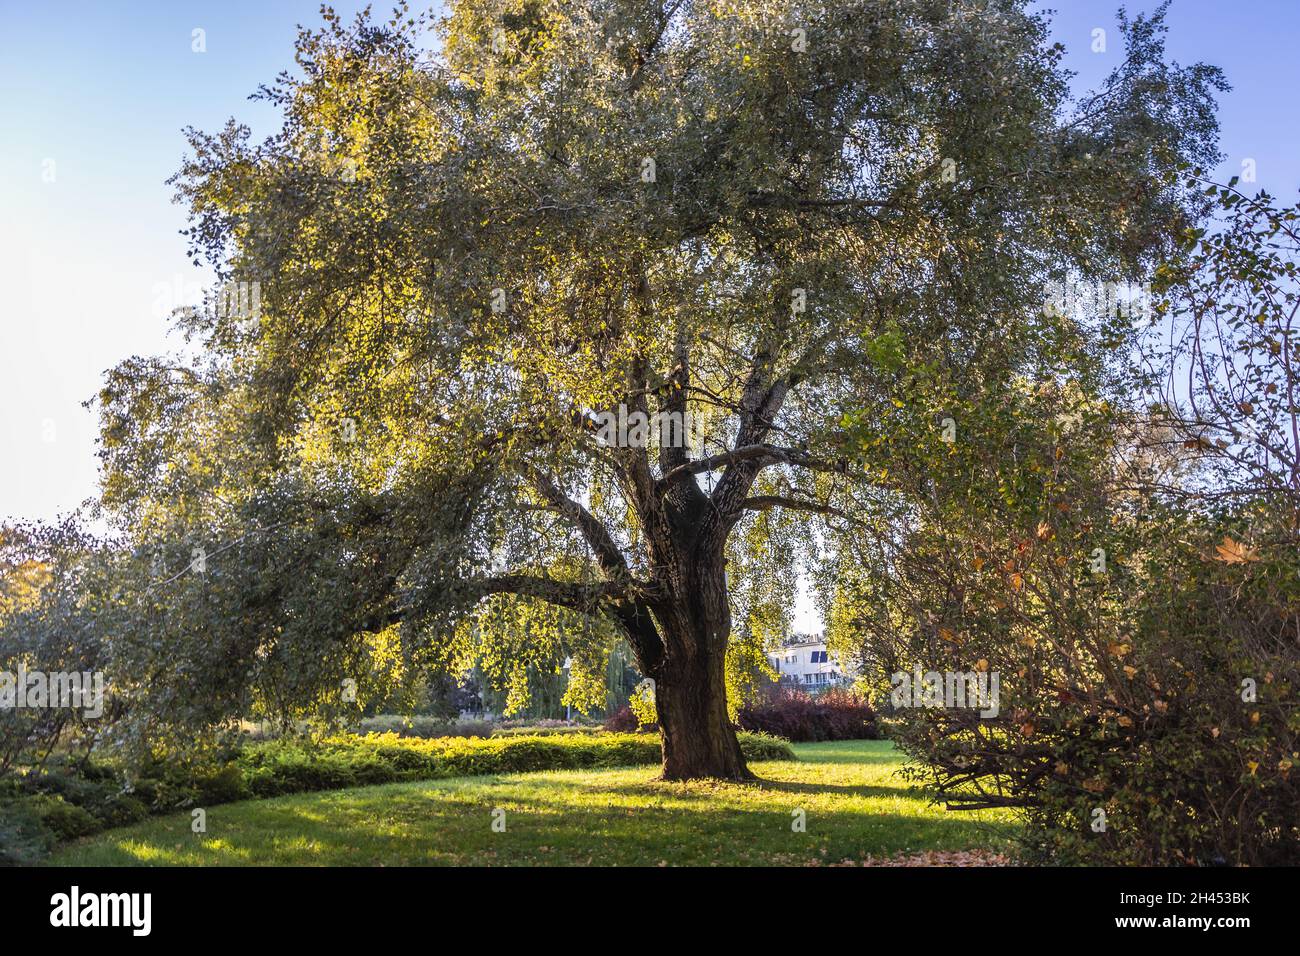 Nature monument Populus alba - silver poplar in Zaslaw Malicki Park located in the center of the Rakowiec estate in Warsaw, capital of Poland Stock Photo